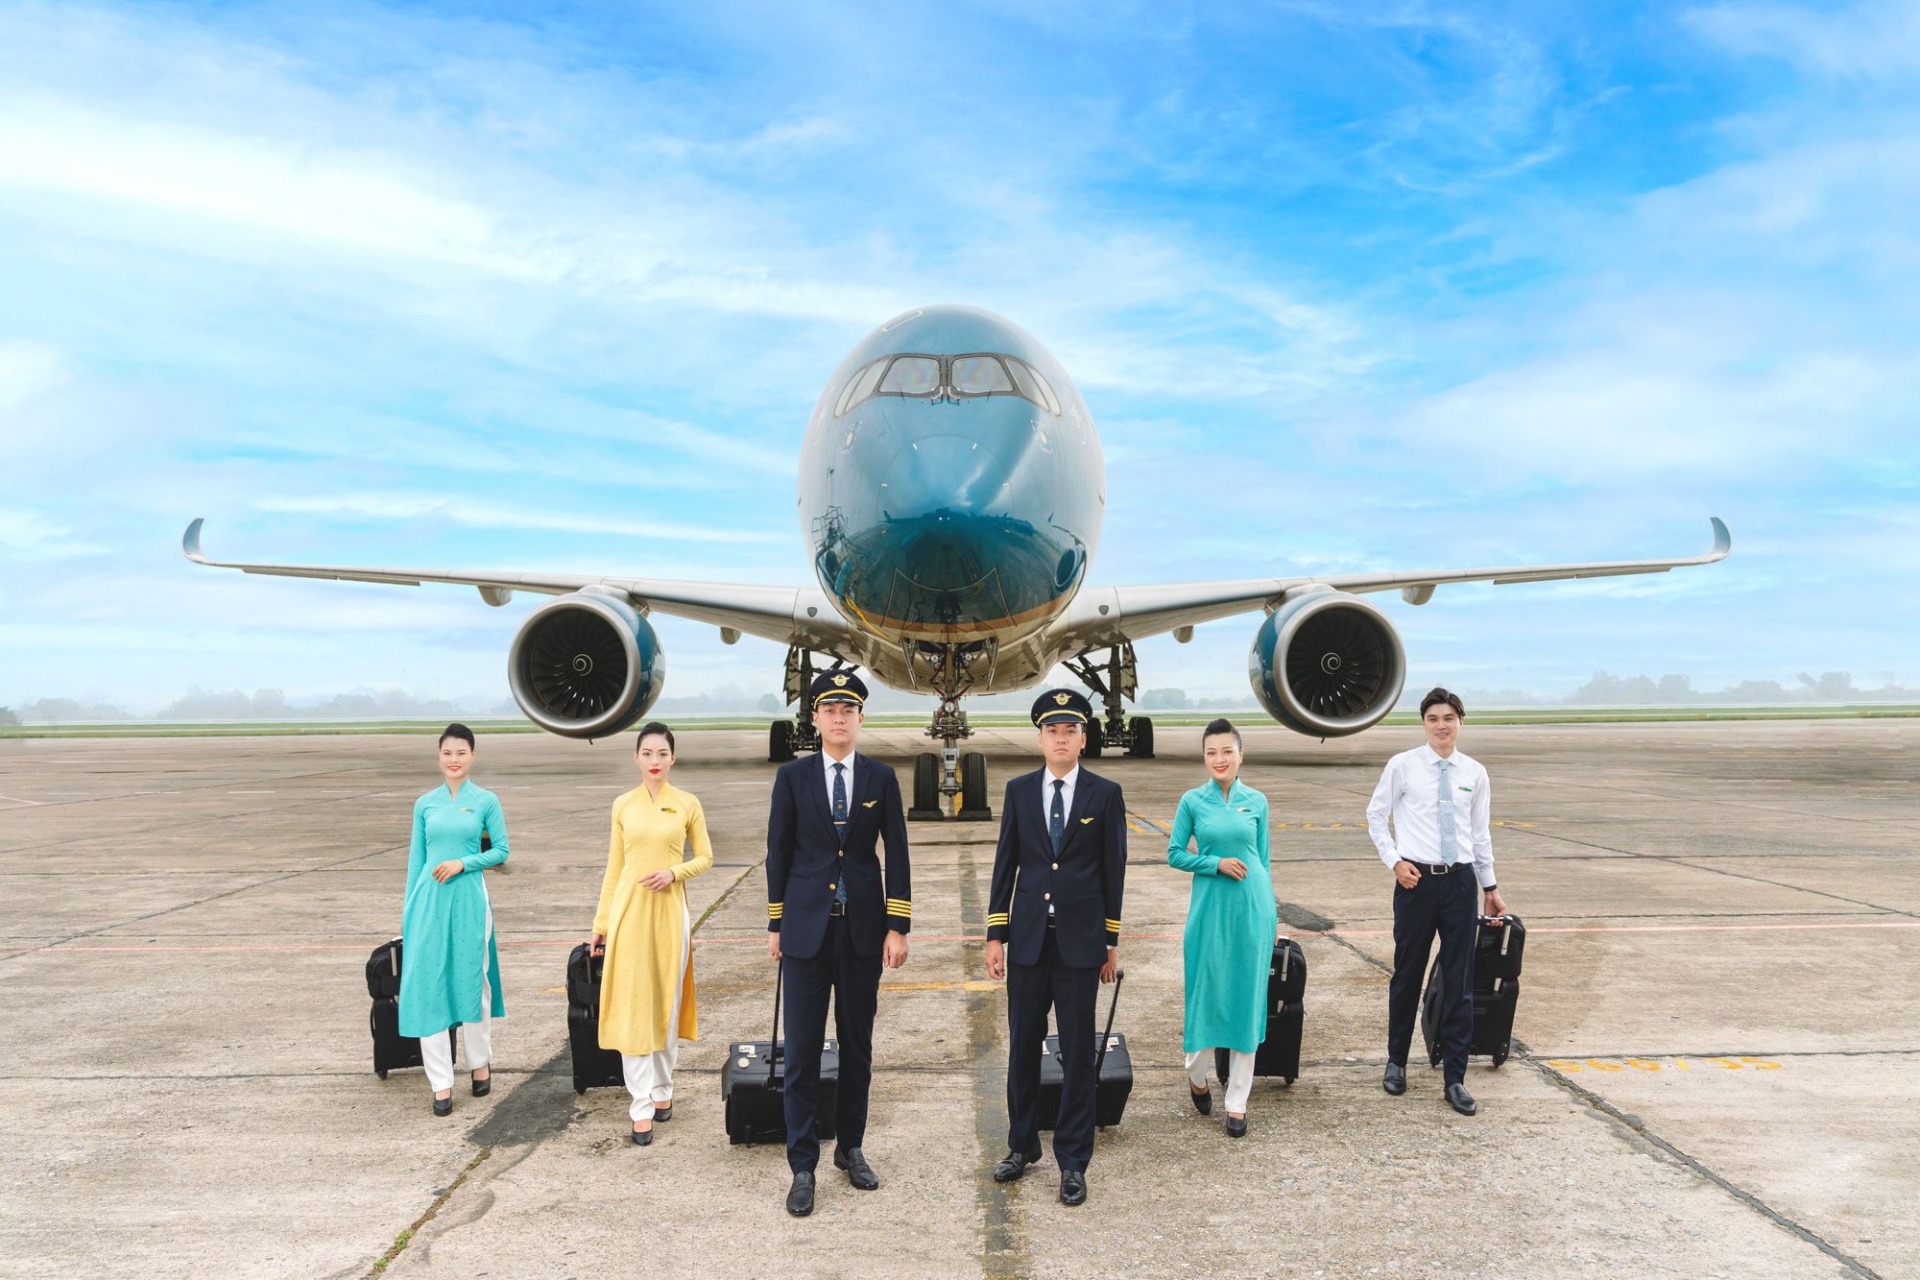 Vietnam Airlines faces challenges to increase international slots